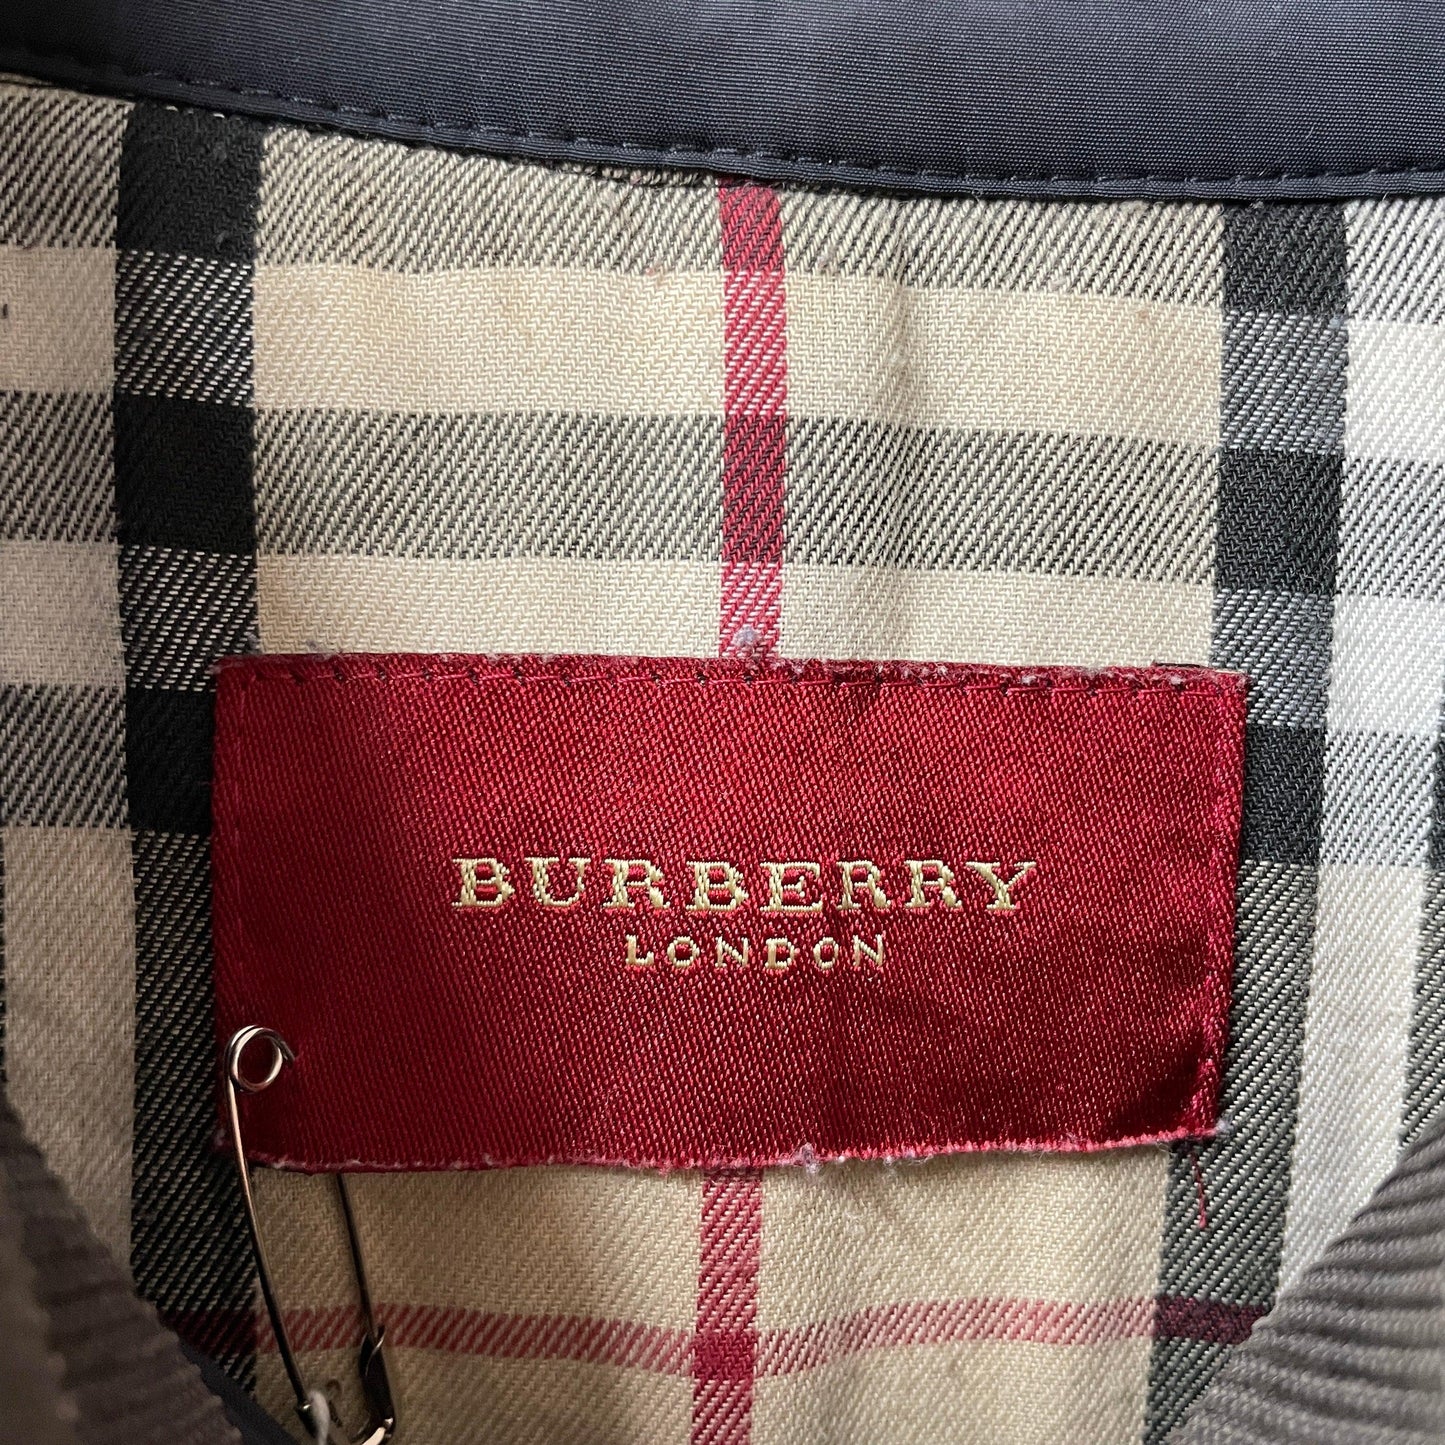 Burberry london jacket Burberry Spain quilting